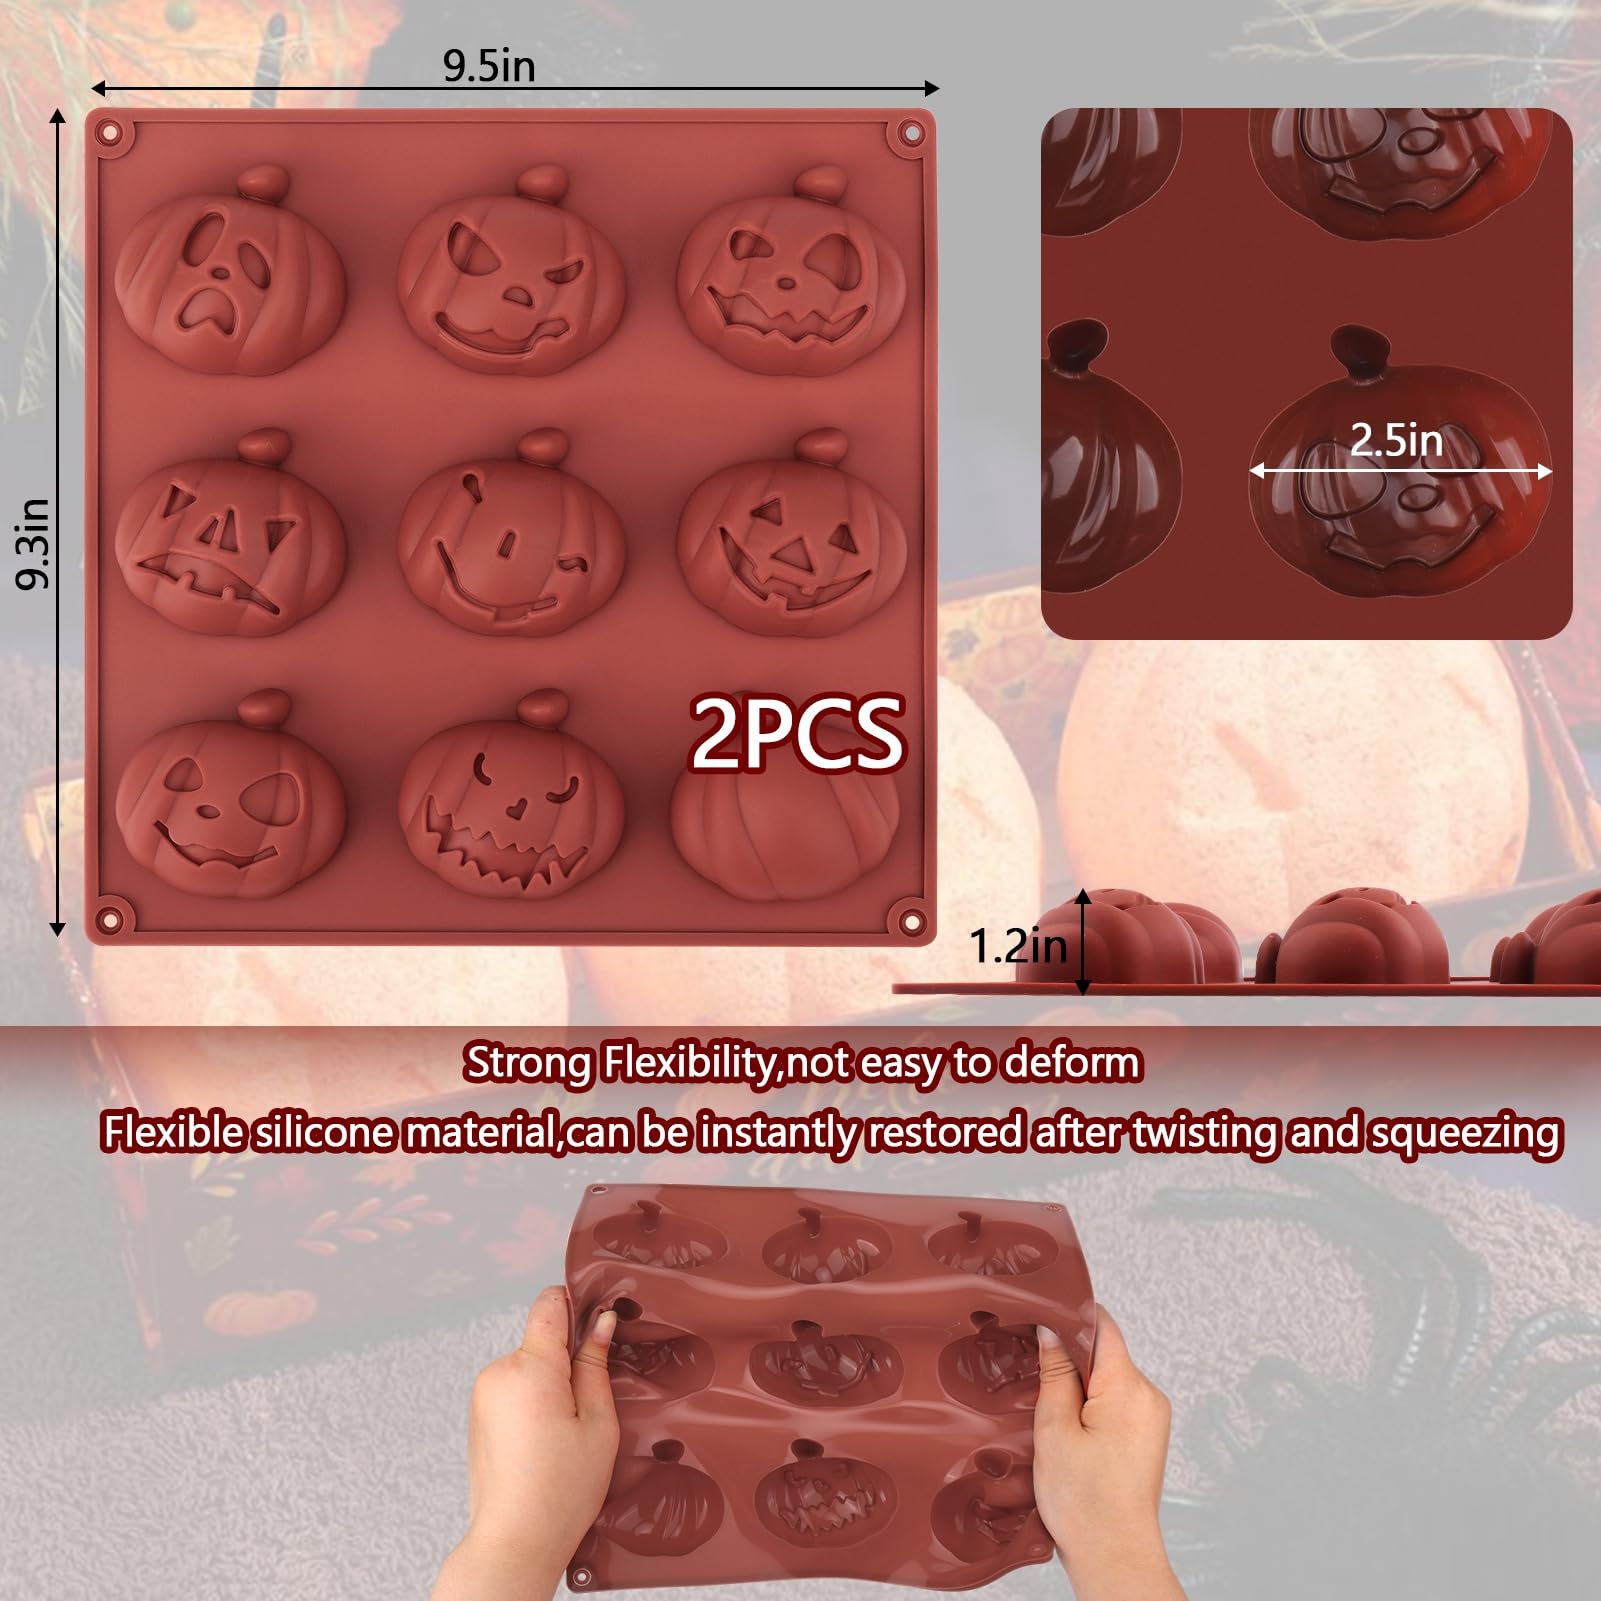 Halloween Molds Silicone for Hot Chocolate Bomb, 2 Pcs 9-Cavity Pumpkin Hot Cocoa Bomb Mold for Halloween Thanksgiving Fall Baking, Hot Chocolate Bombs, Cocoa Bomb, Cake, Jelly